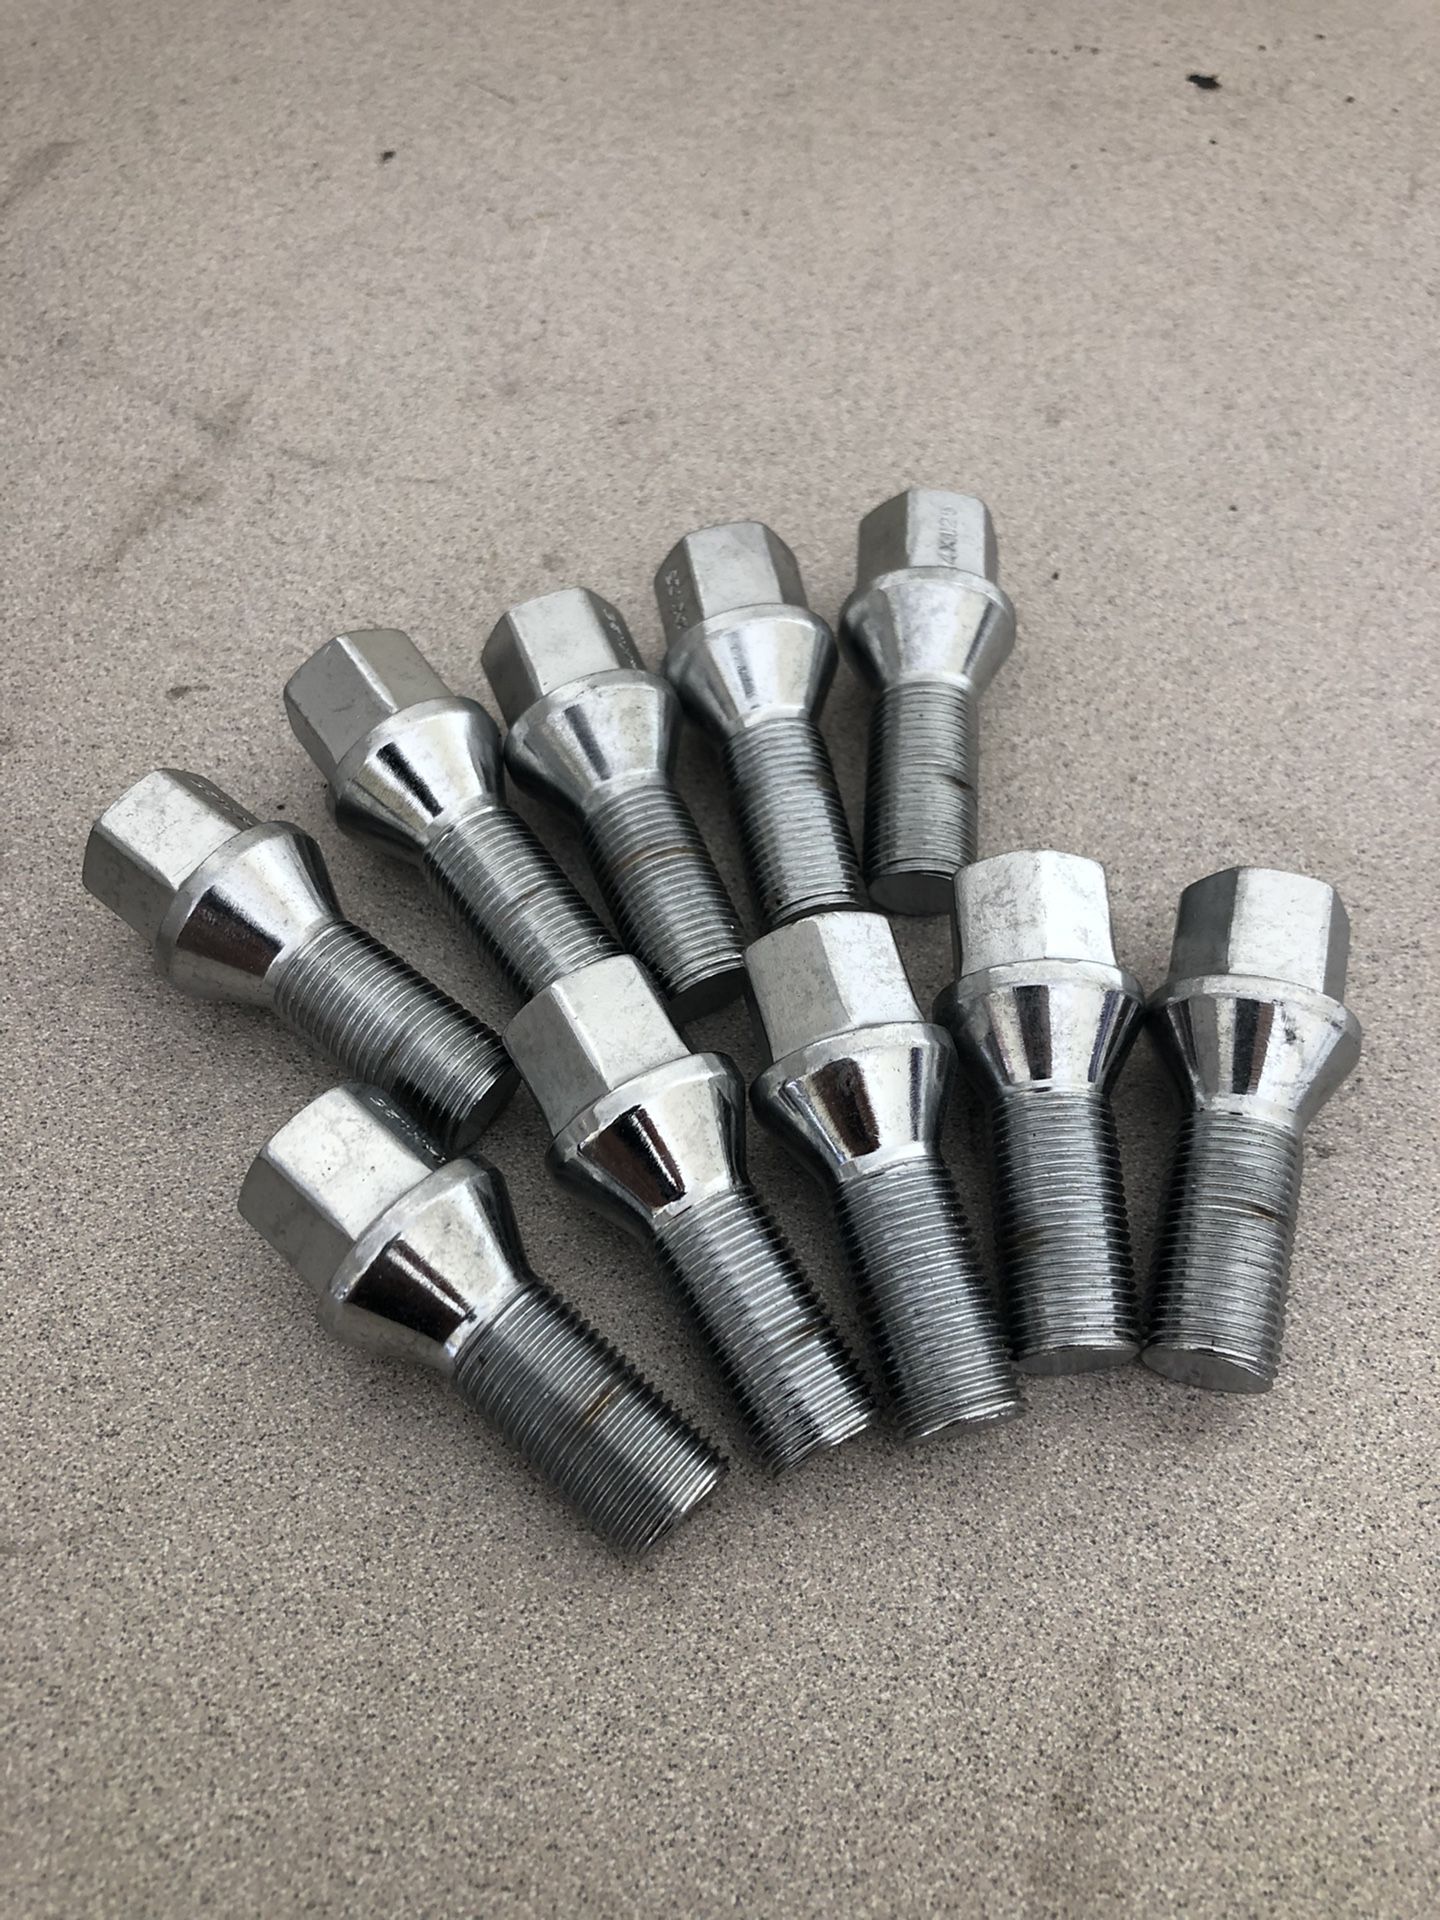 14x1.5 Conical Cone Seat Chrome 40mm Shank 